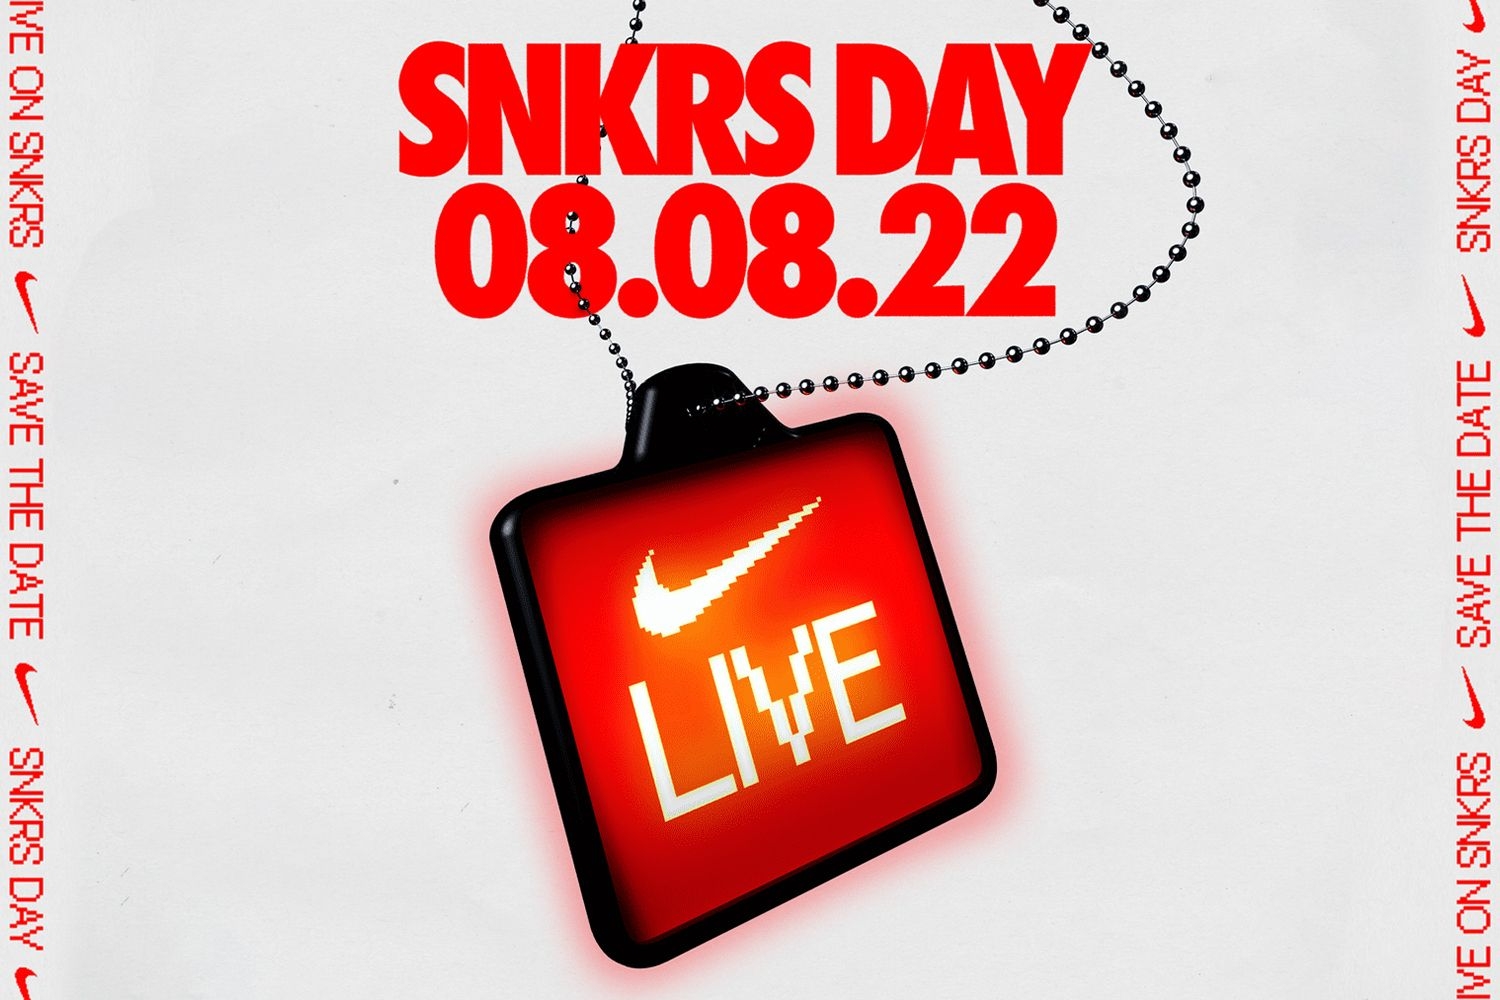 SNKRS DAY 2022 is just around the corner!